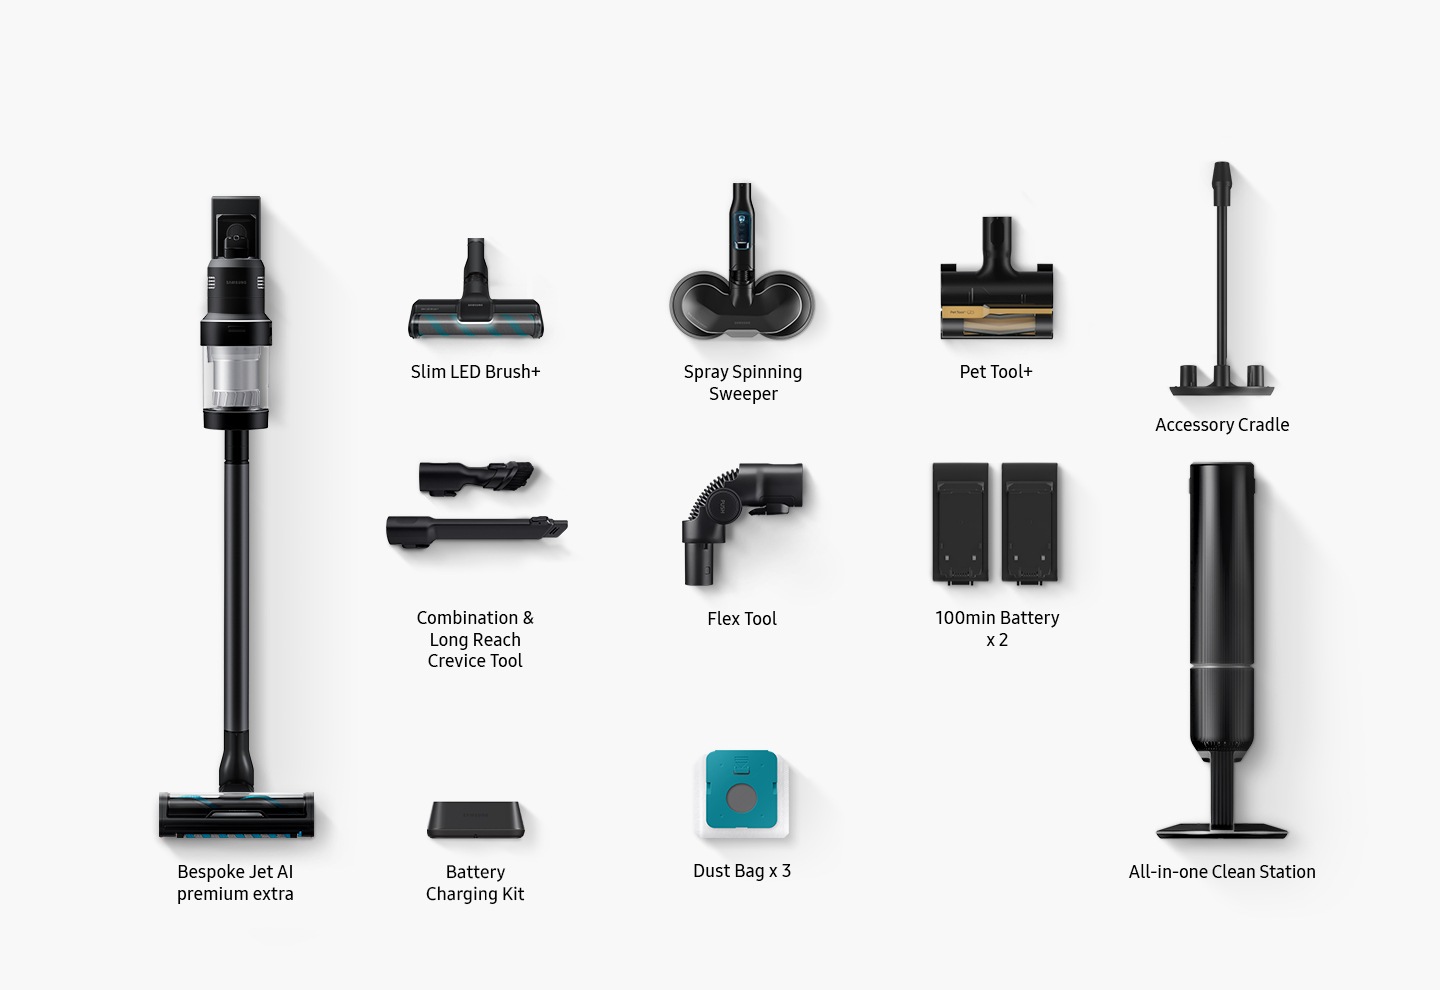 The components that come in the box include Bespoke Jet™ AI, Active Dual Brush, Pet tool+, 100min battery, Combination Tool, Long Reach Crevice Tool, Dust bag x 7, All-in-one Clean Station.